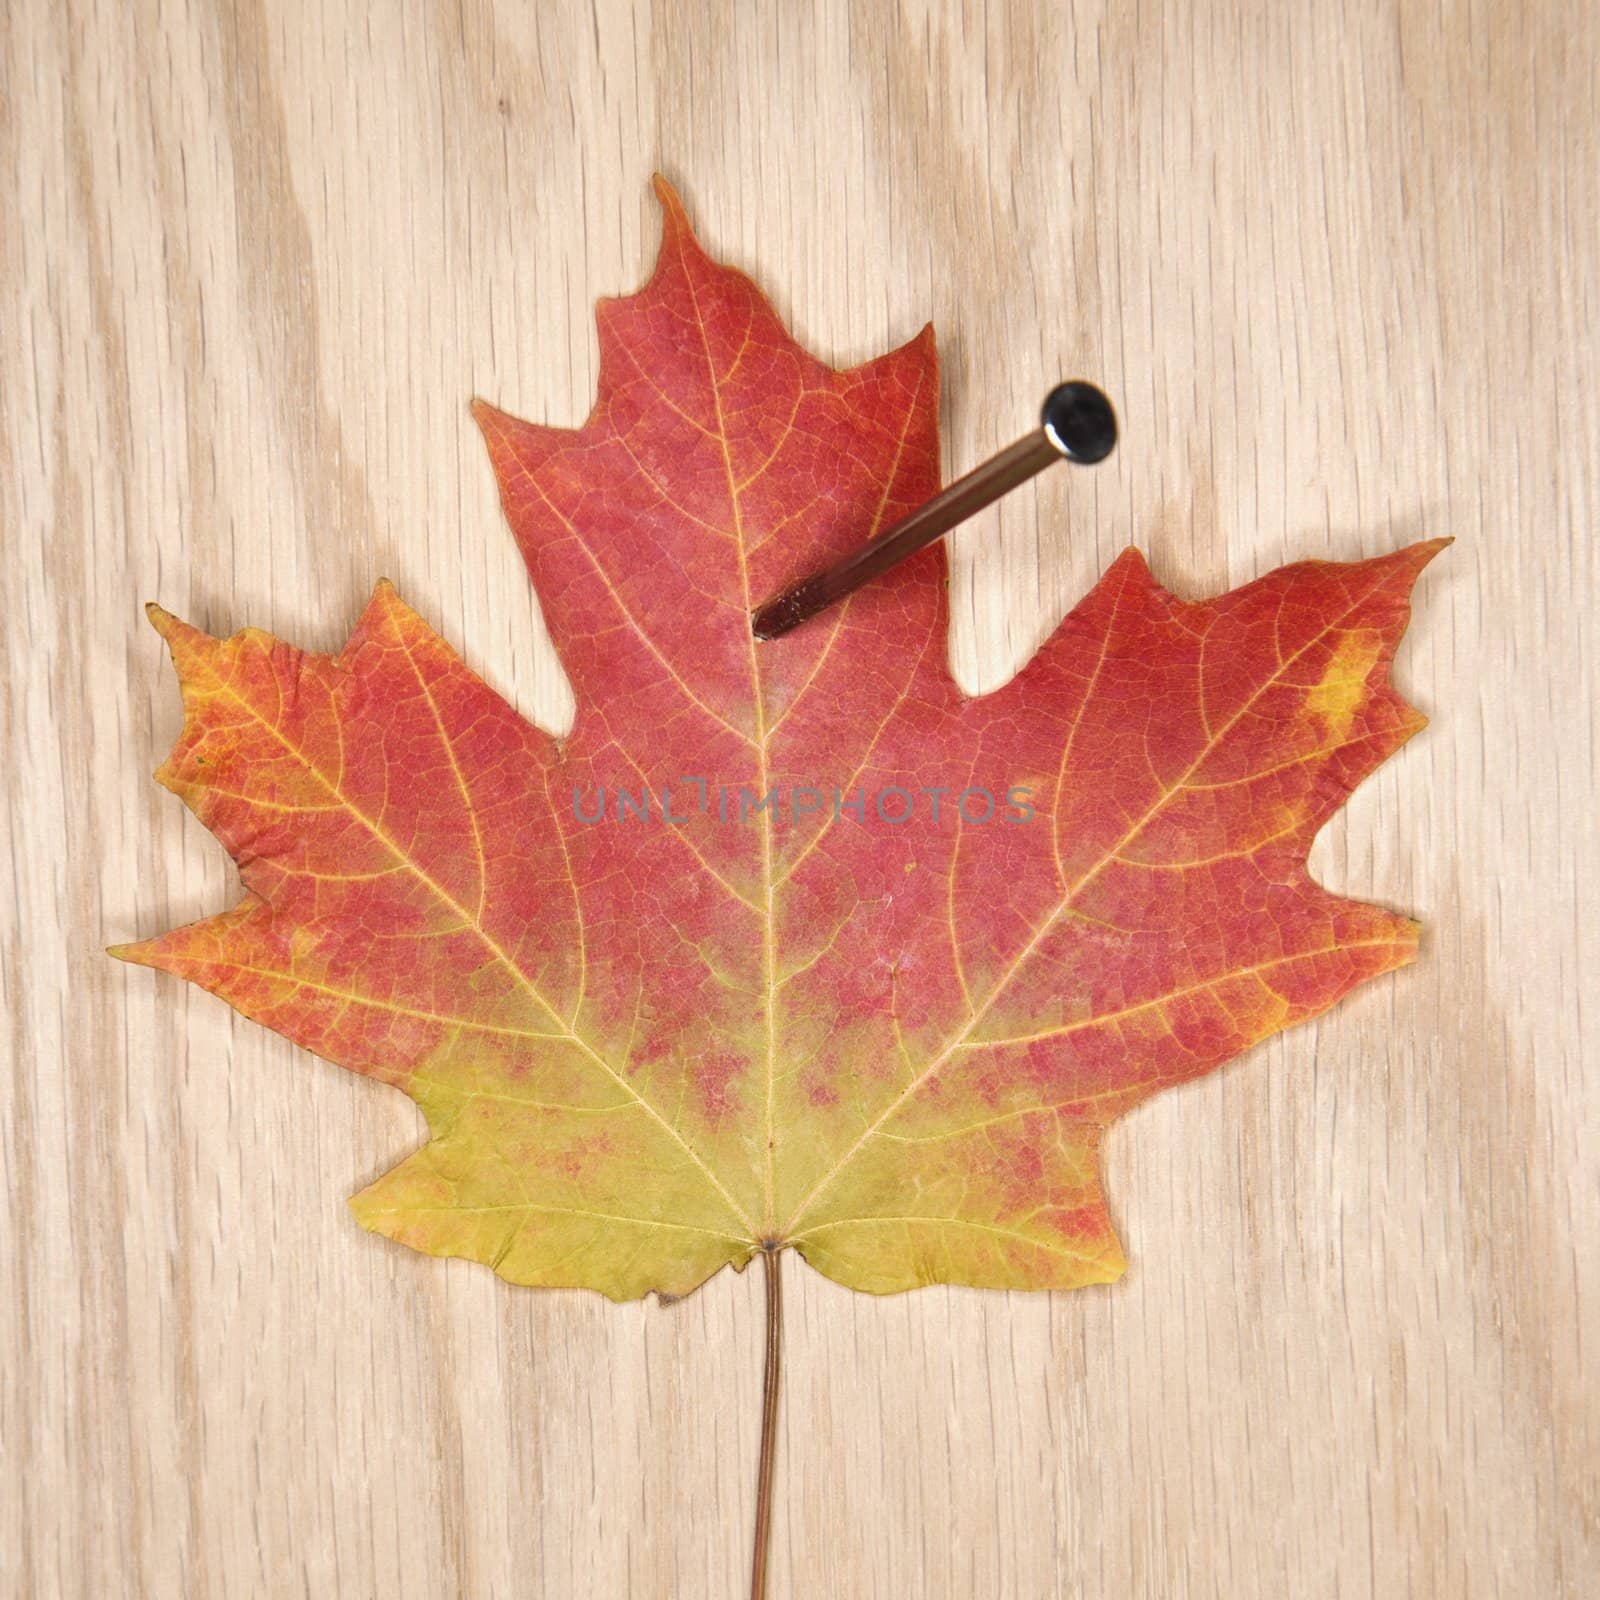 Nailed maple leaf. by iofoto